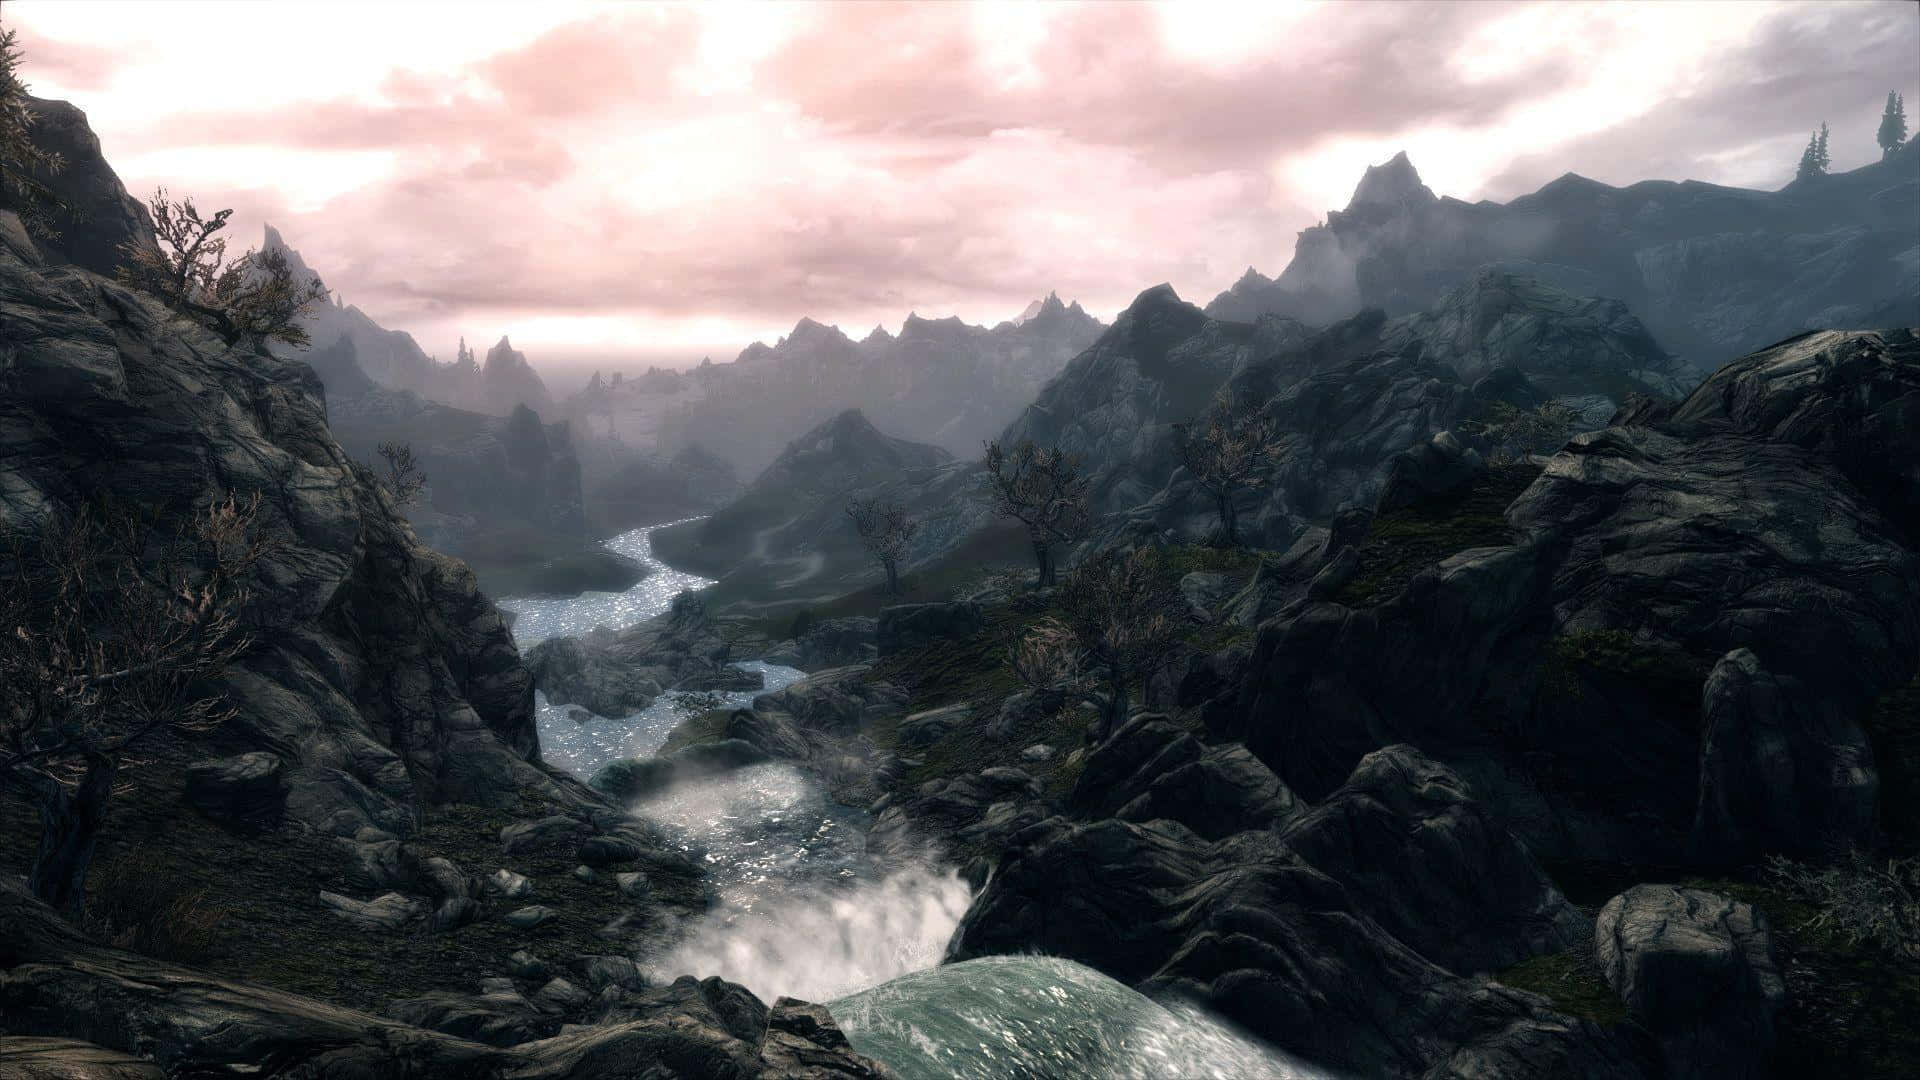 Stunning view of the majestic mountains in Skyrim Wallpaper